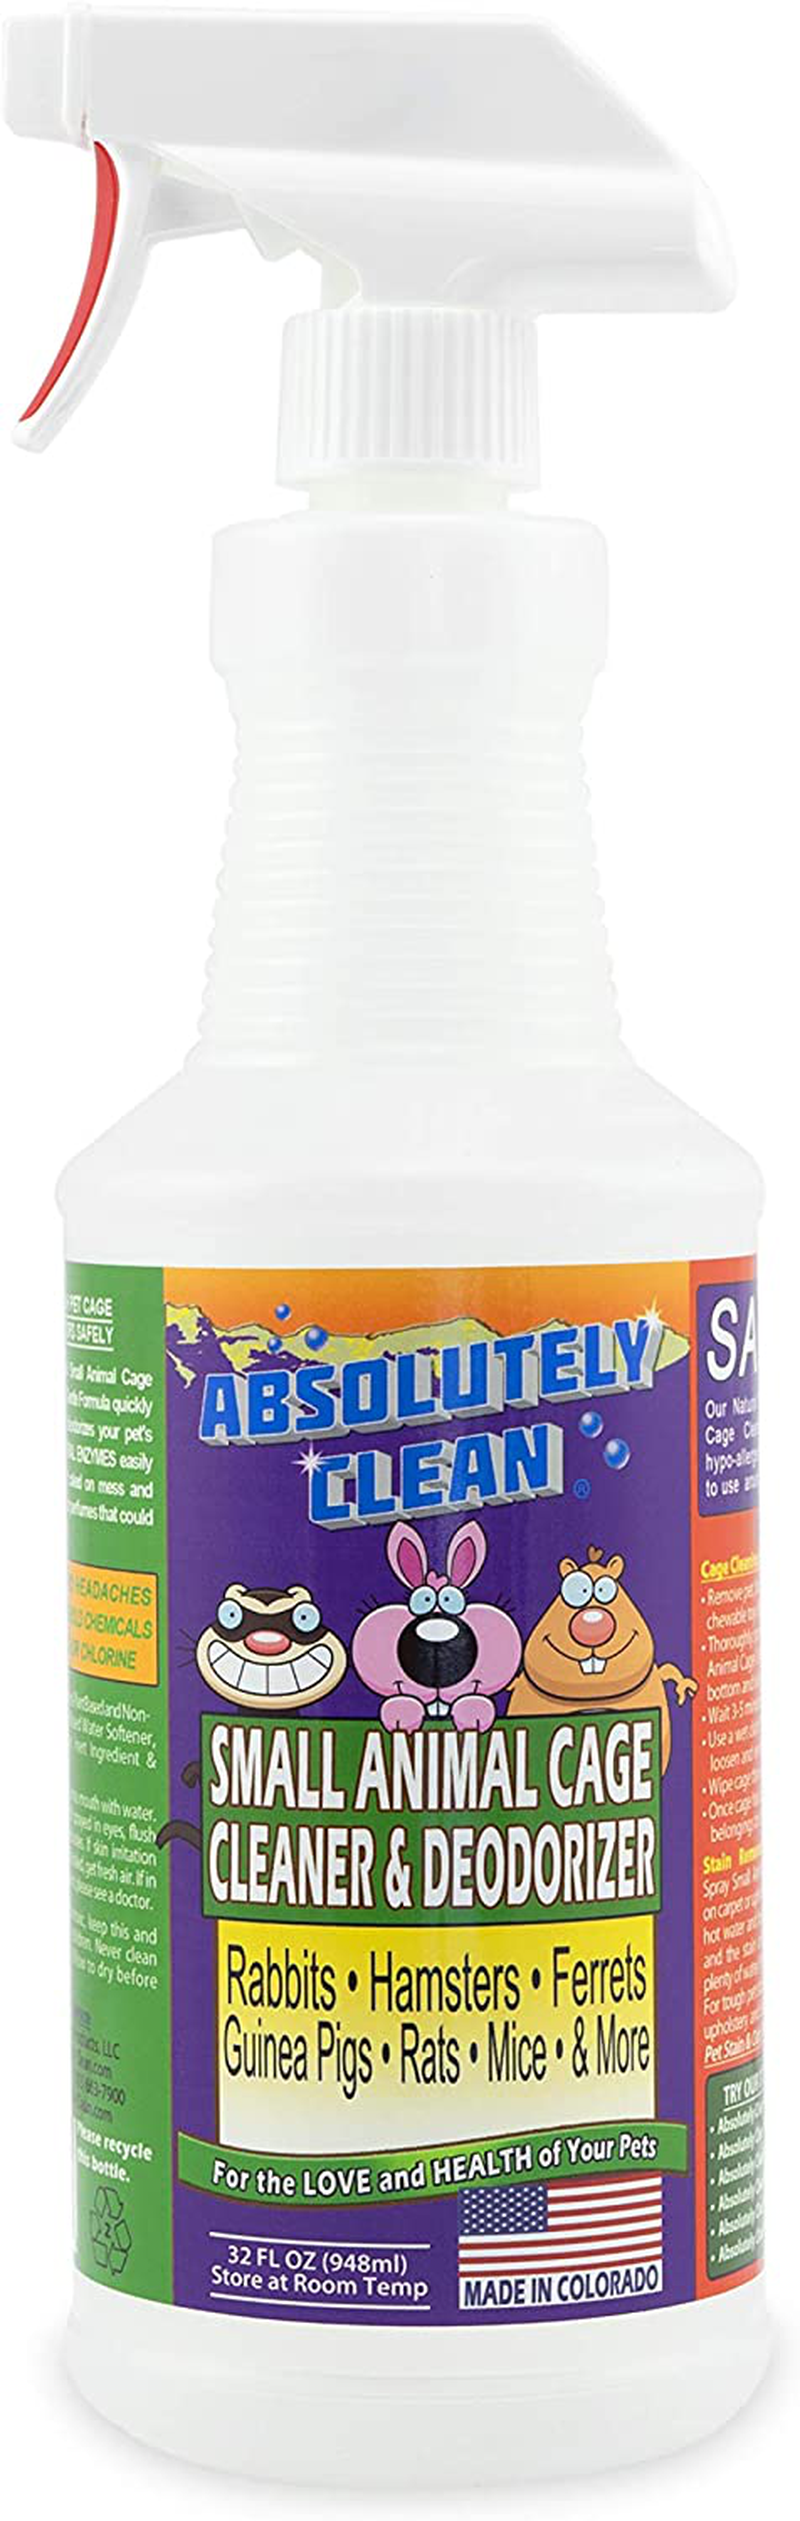 Amazing Small Animal Cage Cleaner - Just Spray/Wipe - Easily Removes Messes & Odors - Hamsters, Mice, Rats, Guinea Pigs, Ferrets - USA Made Animals & Pet Supplies > Pet Supplies > Small Animal Supplies > Small Animal Habitats & Cages Absolutely Clean 32 oz  